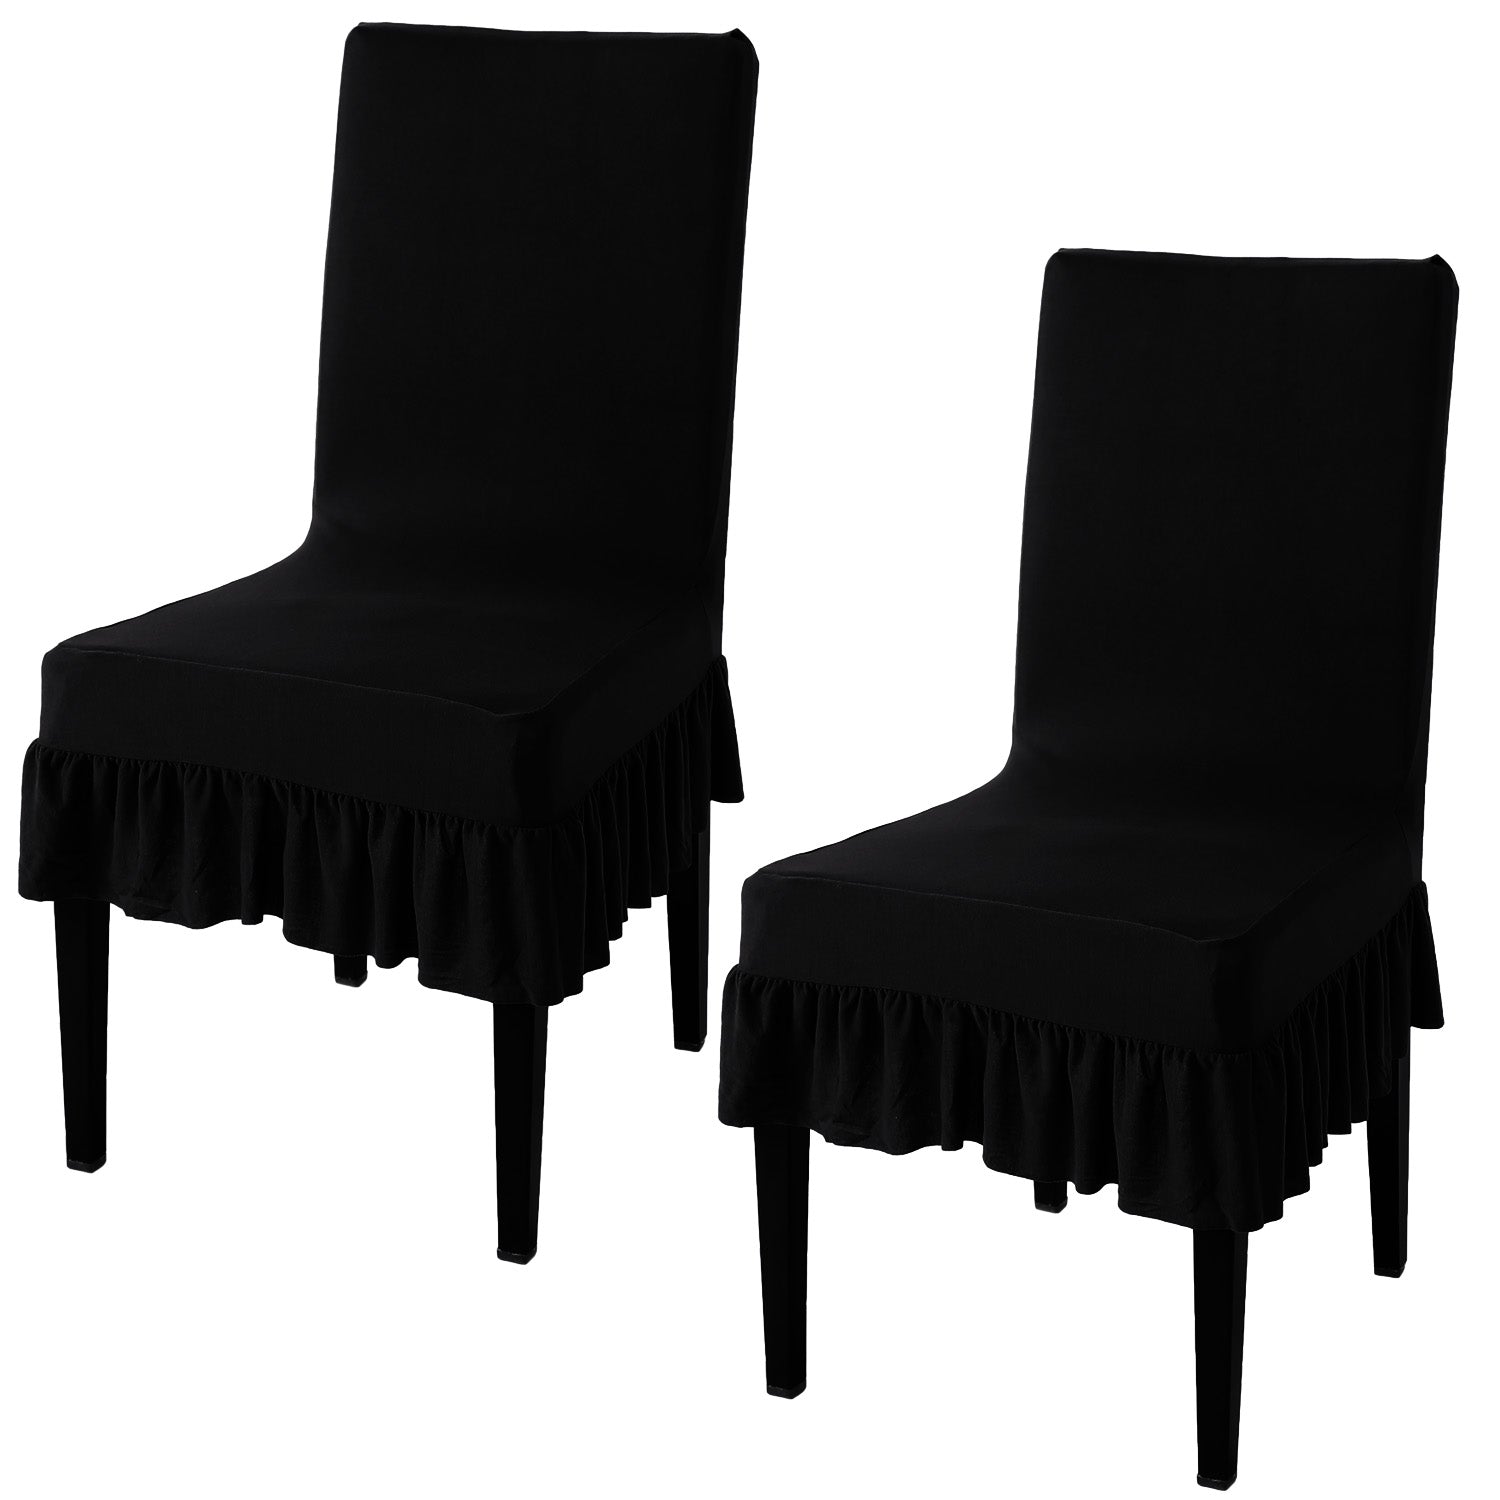 Elastic Stretchable Dining Chair Cover with Frill, Black